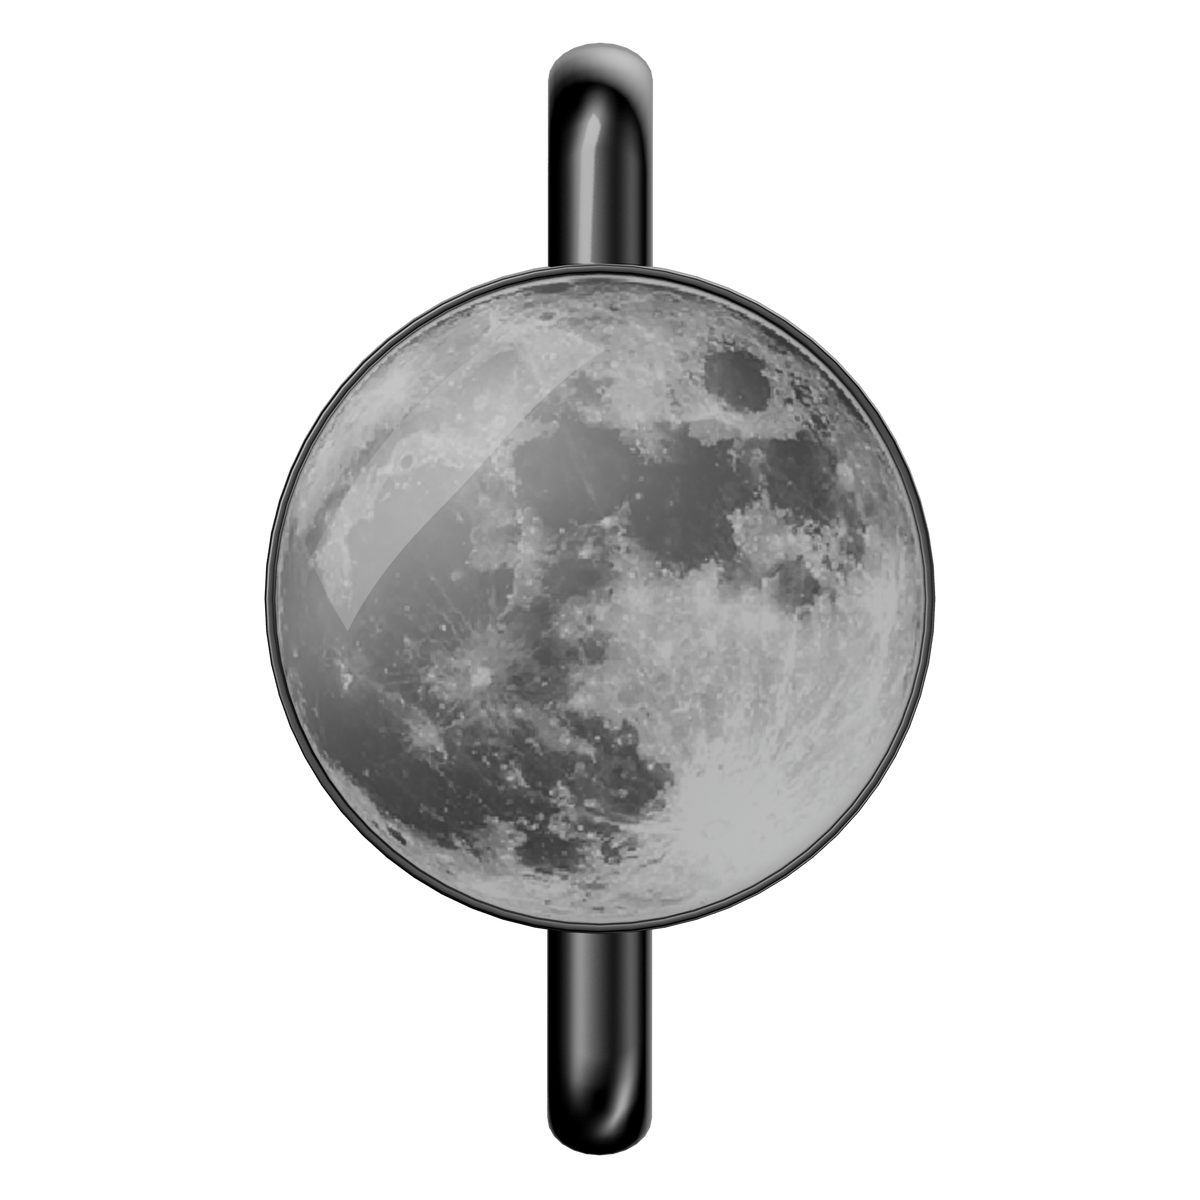 This is a charm that fits ZOX single wristbands, lanyards and hoodie strings only. It is made from stainless steel and is gunmetal in color. It has a realistic design of the moon which is covered in clear enamel. 